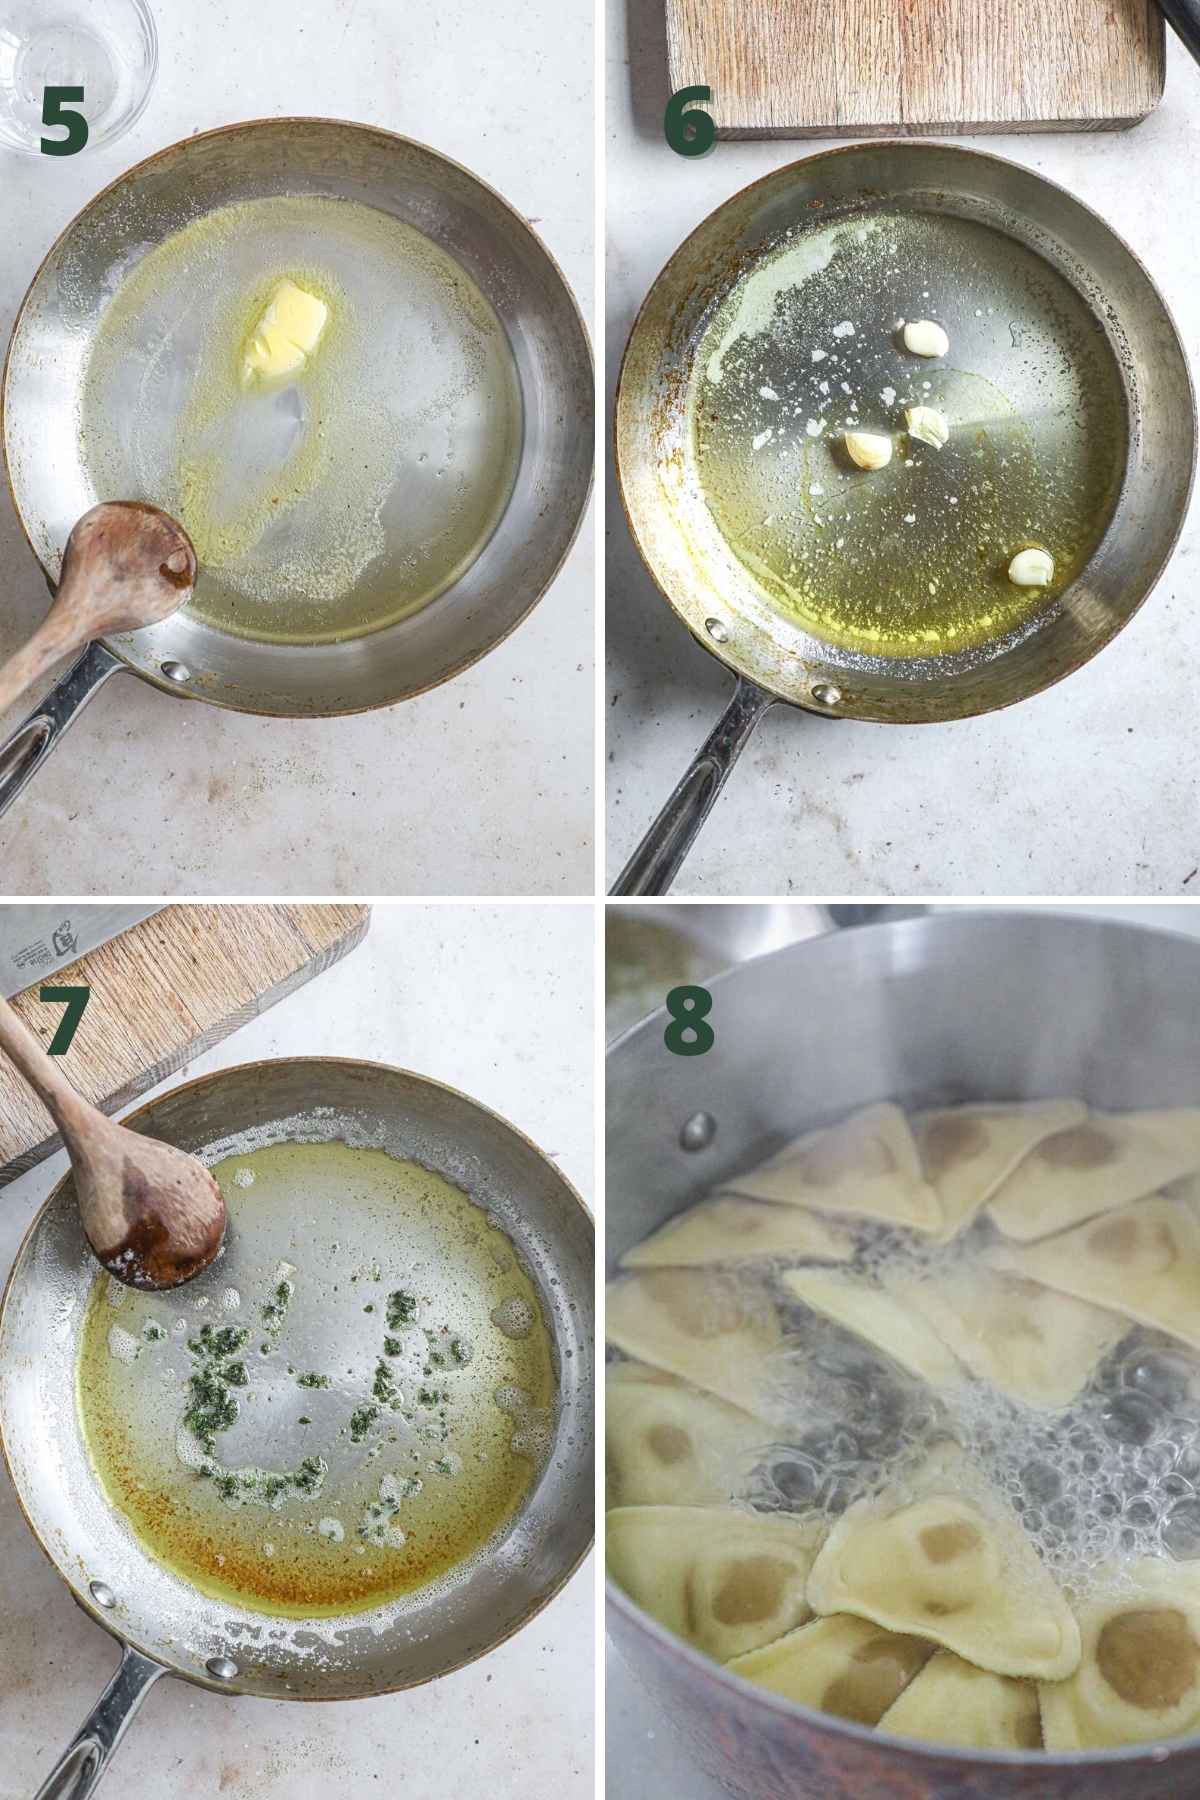 Steps to make browned butter sage sauce for ravioli, including browning the butter with olive oil, cooking the garlic, mixing in the fried chopped sage leaves, and boiling the ravioli.